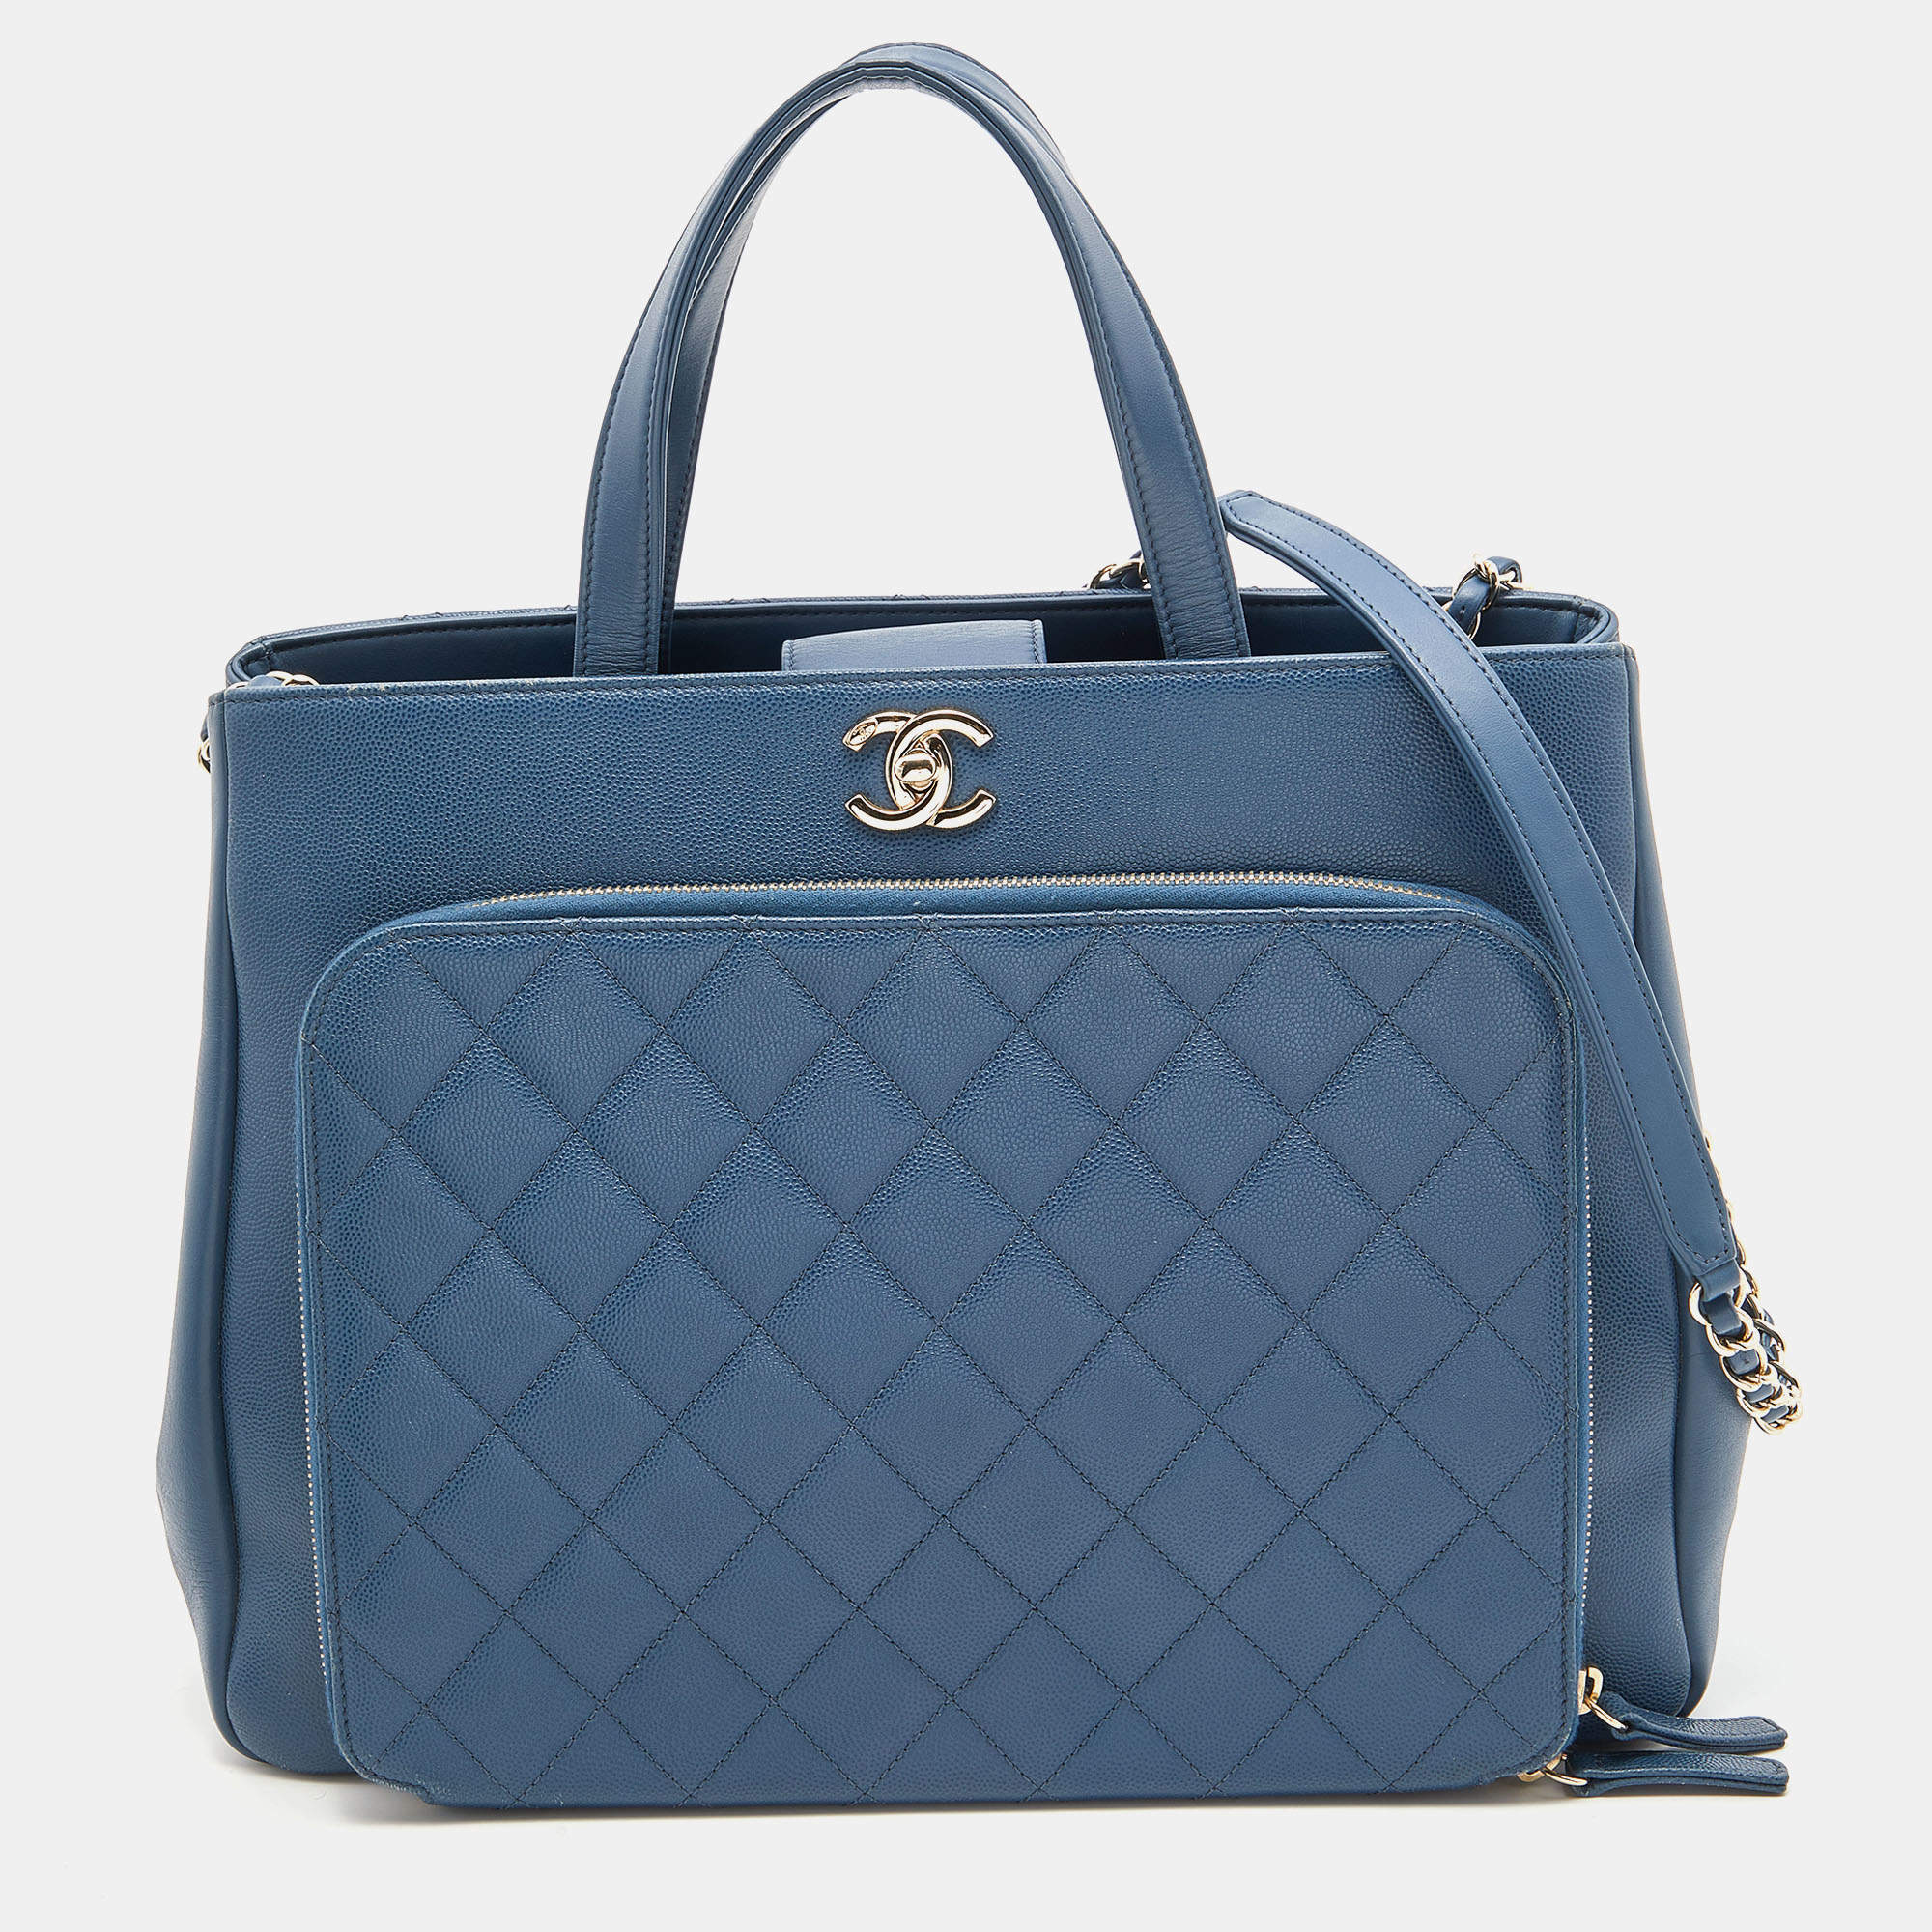 Chanel Business Affinity Tote bag in blue caviar quilted leather